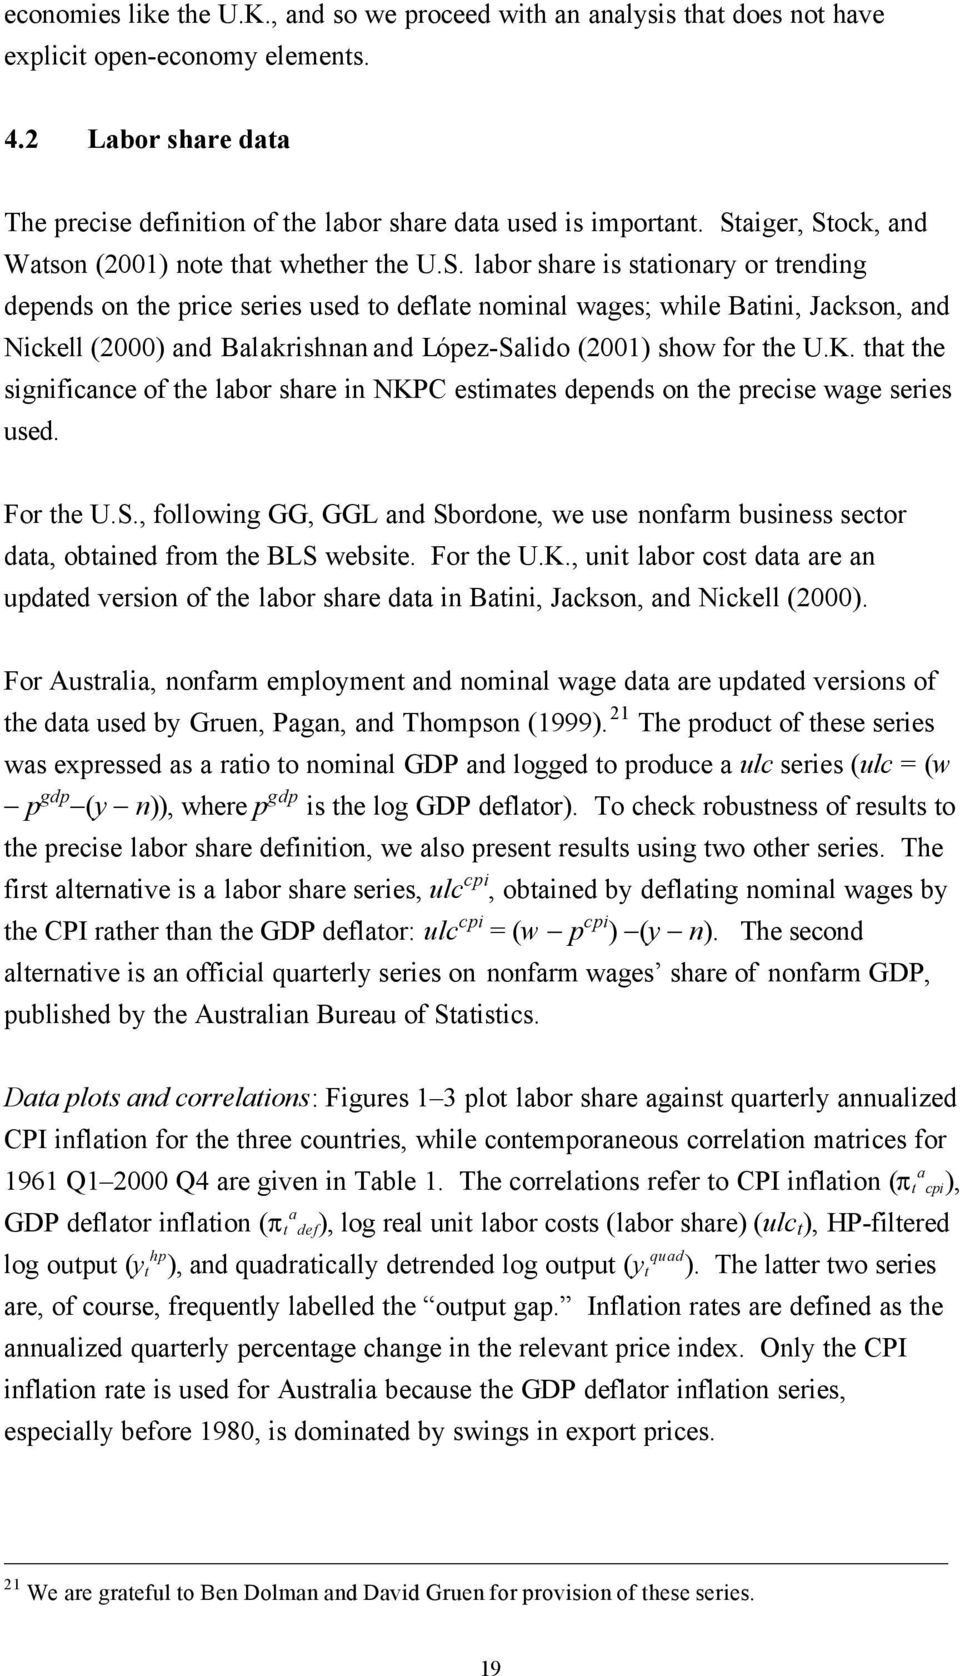 K. that the significance of the labor share in NKPC estimates depends on the precise wage series used. For the U.S.